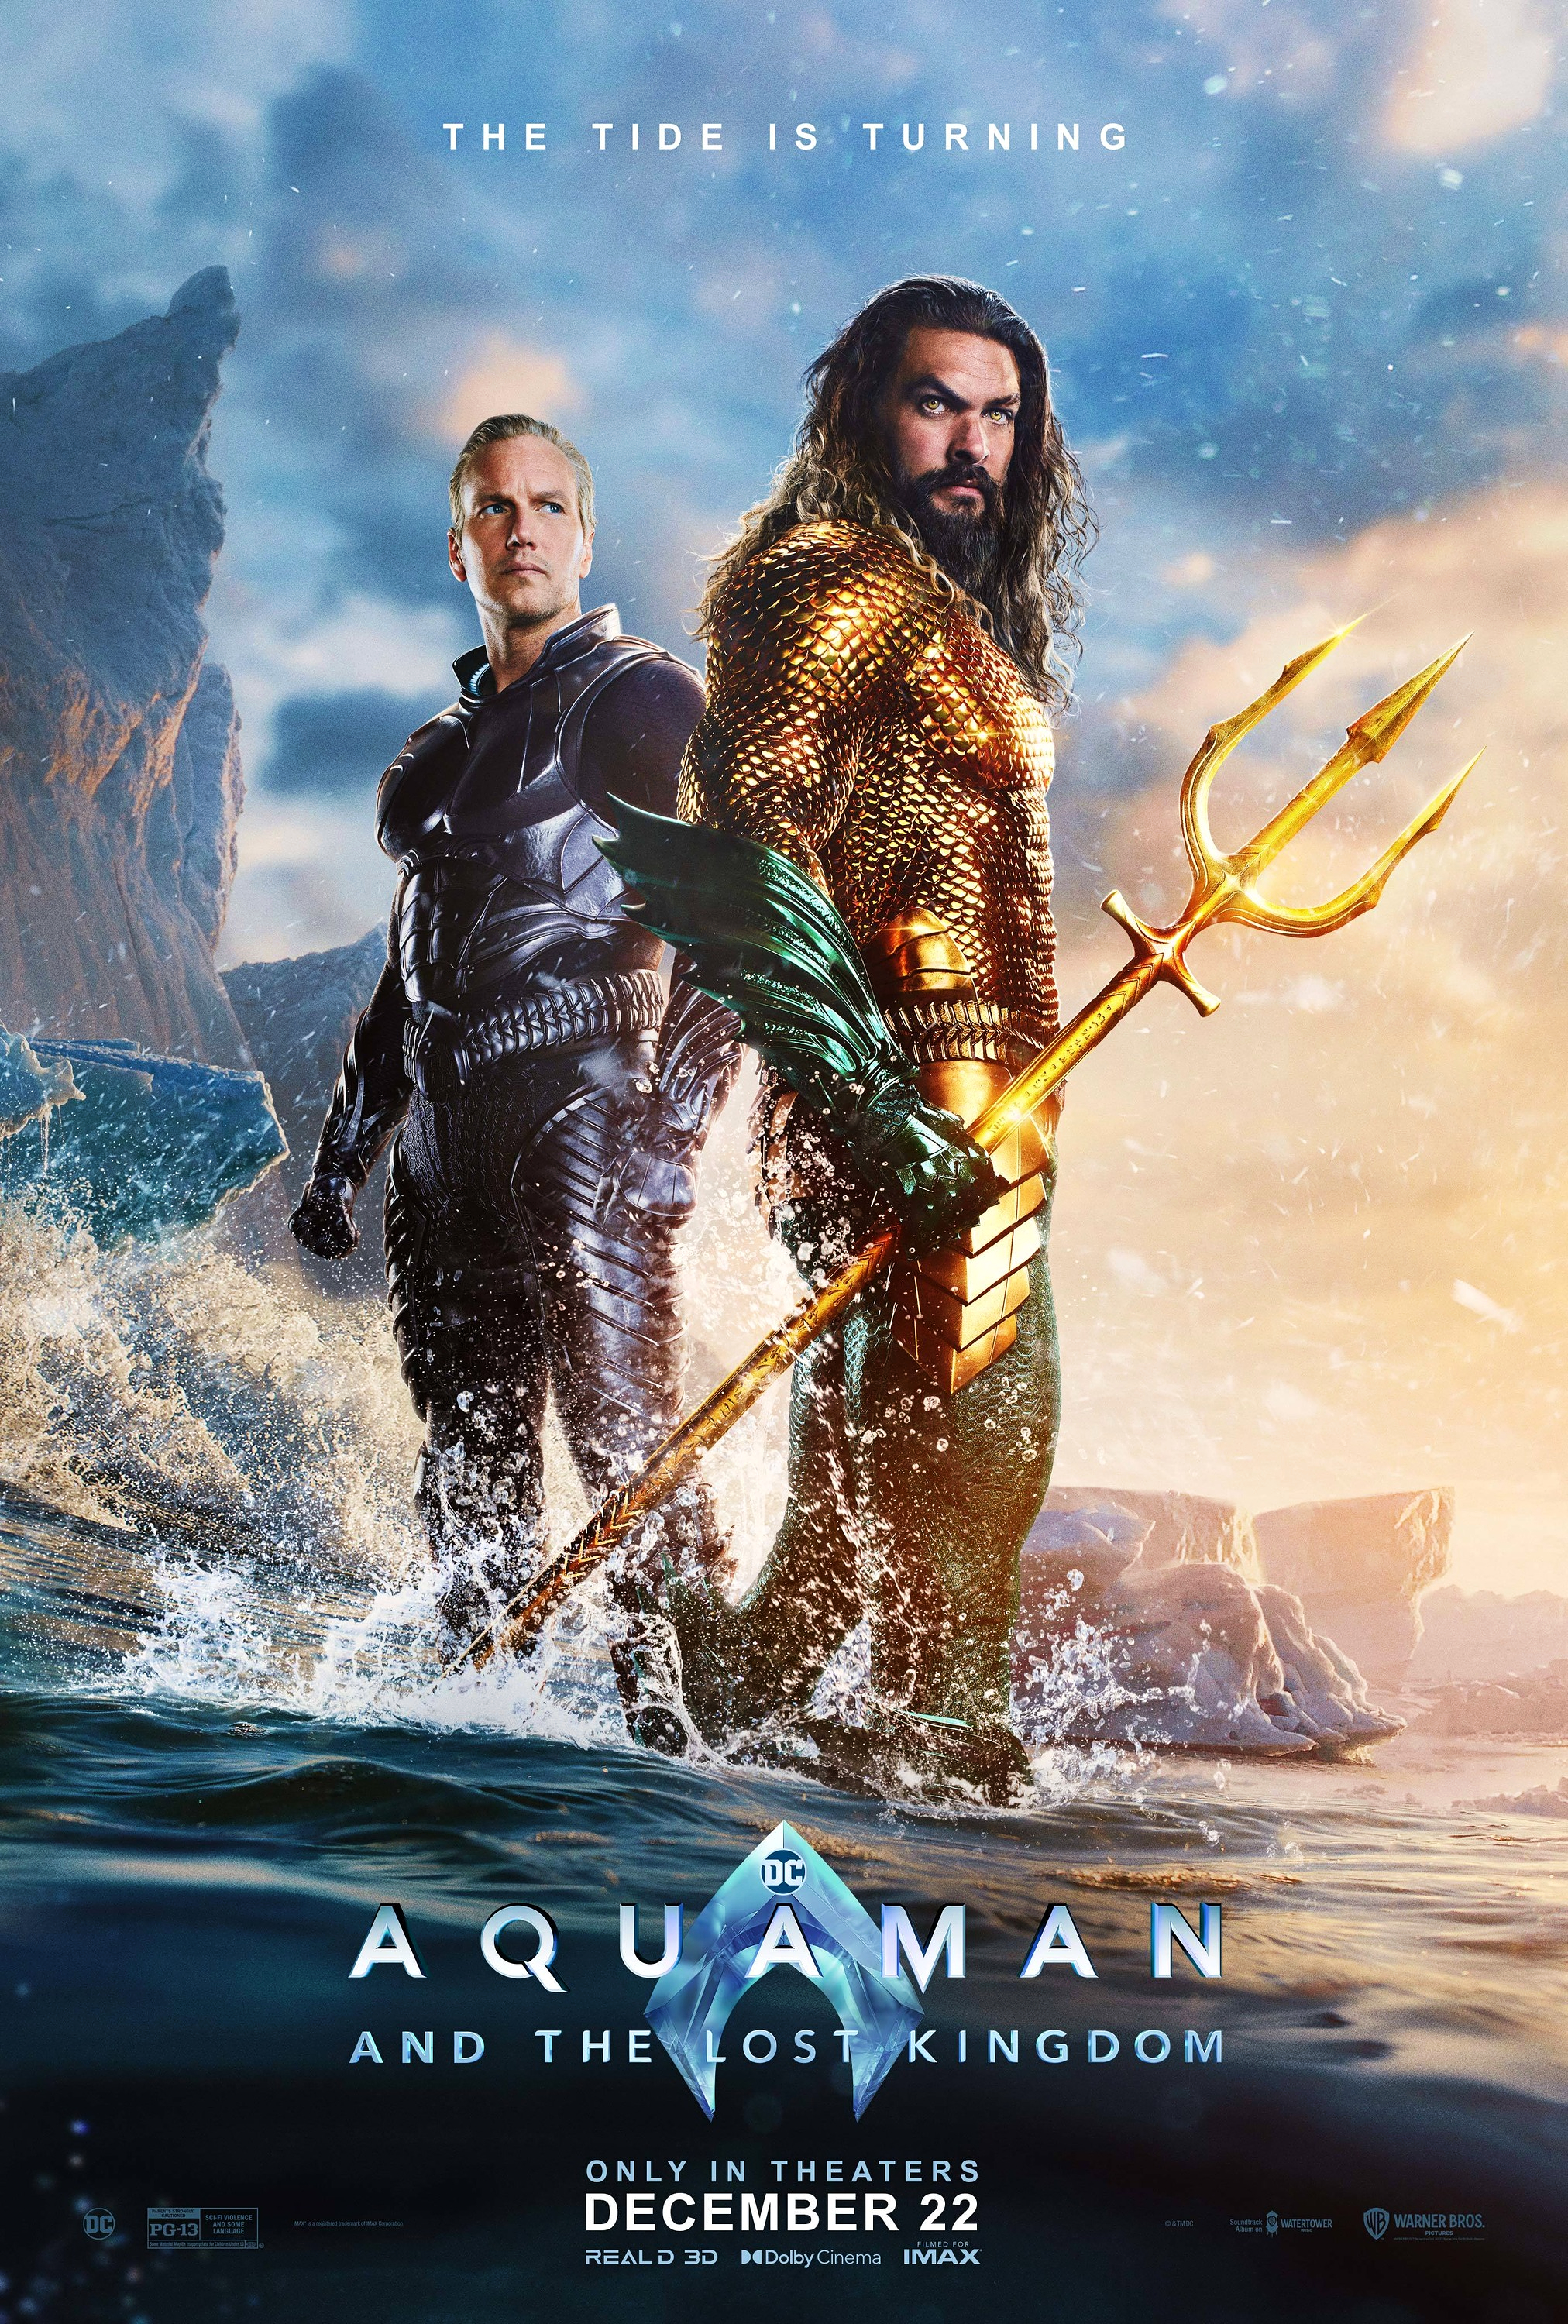 https://static.wikia.nocookie.net/dccu/images/a/a7/Aquaman_and_the_Lost_Kingdom_-_Brothers_Poster.jpg/revision/latest?cb=20231122004738